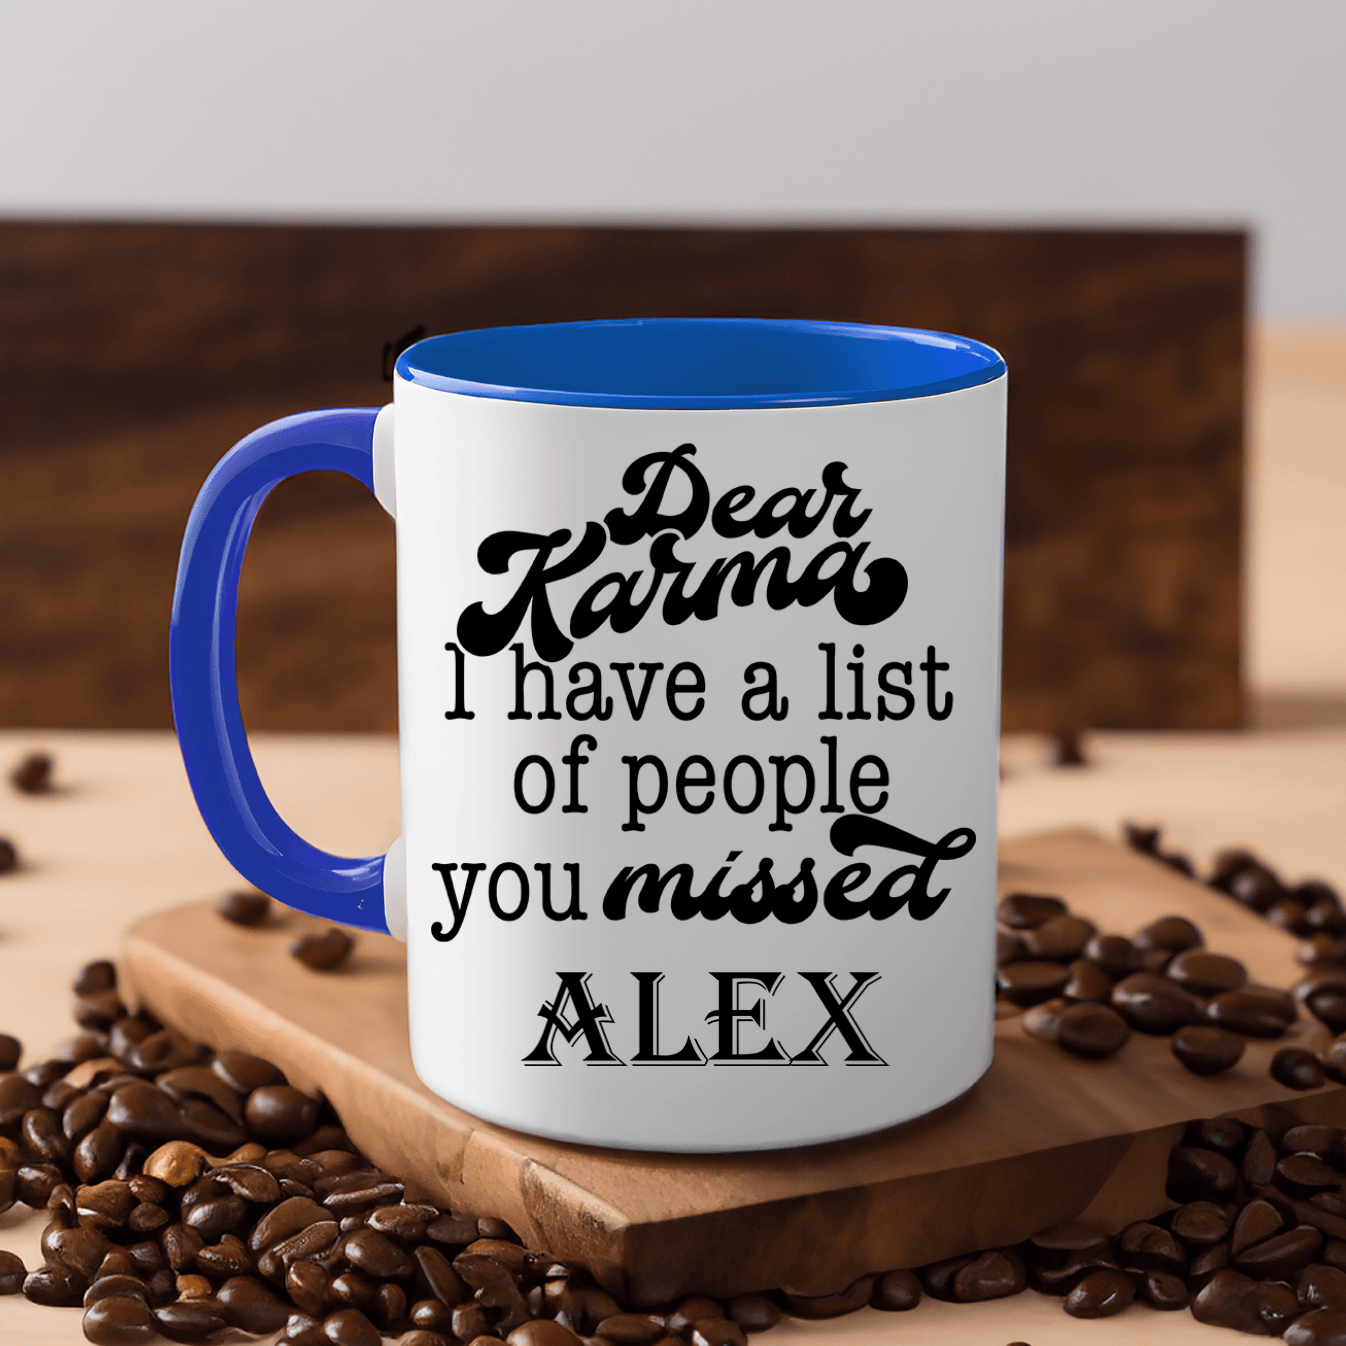 Blue Funny Coffee Mug With Dear Karma You Missed These Design